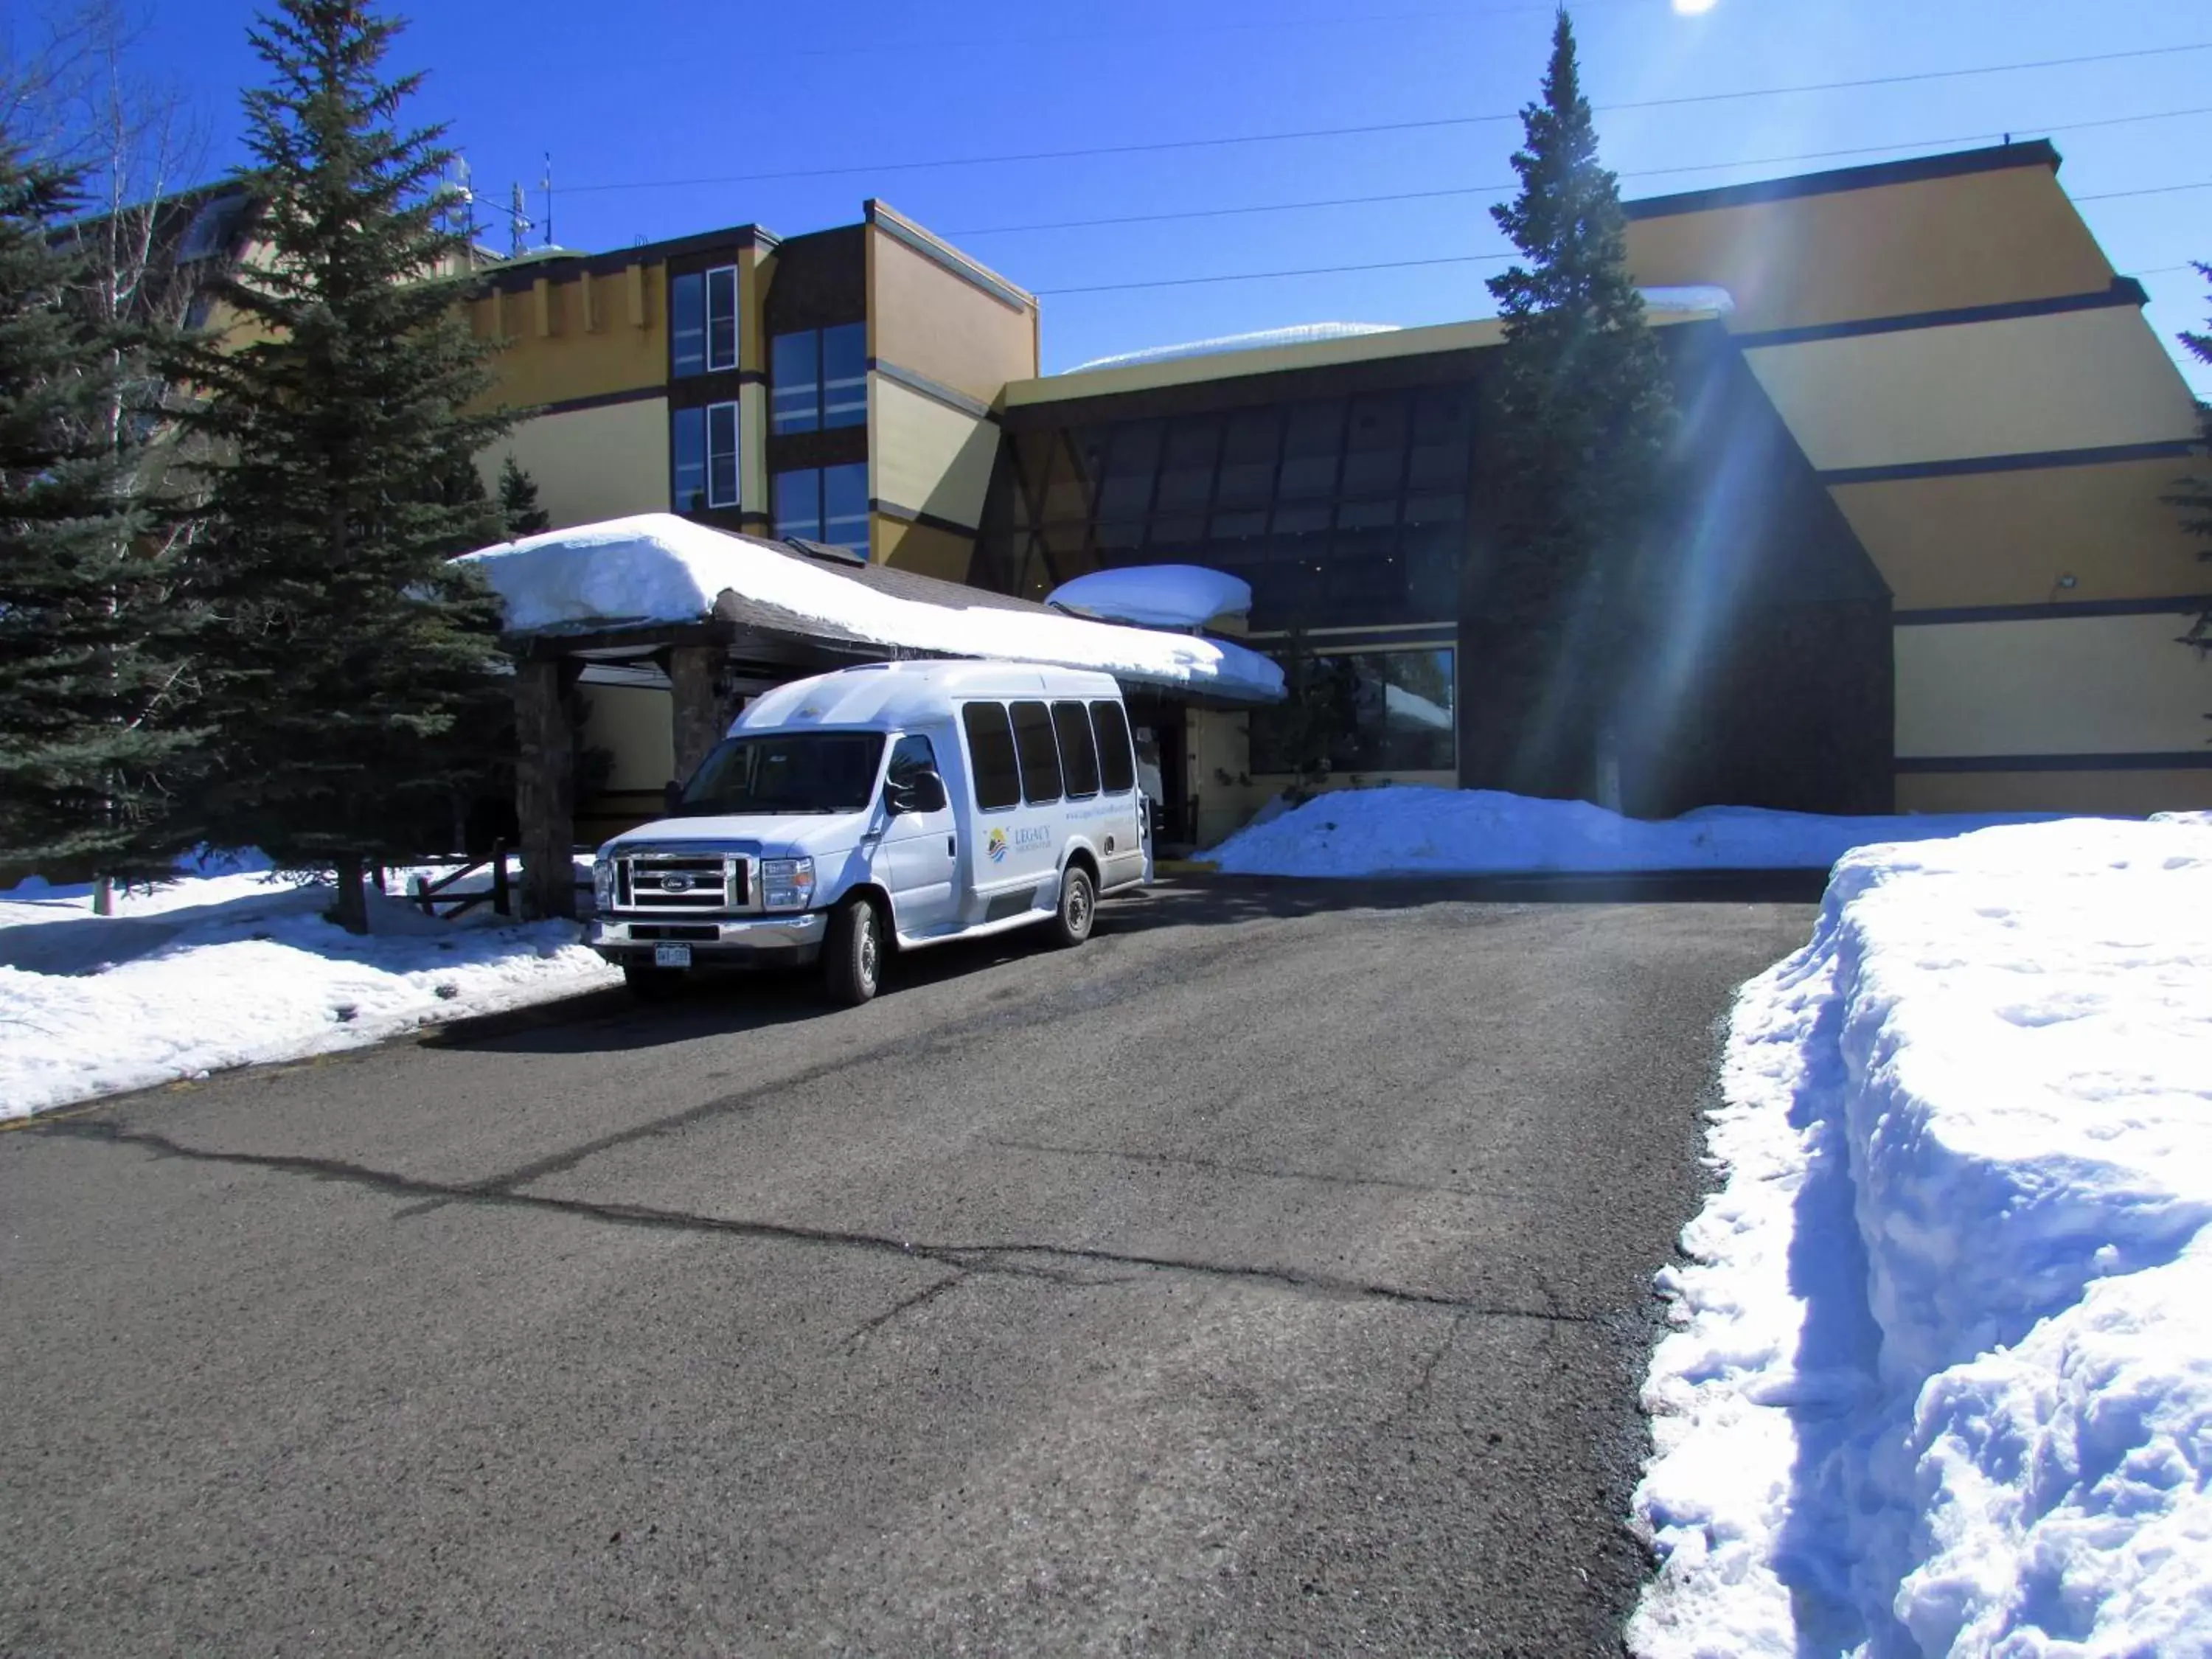 Area and facilities, Property Building in Legacy Vacation Resorts Steamboat Springs Hilltop